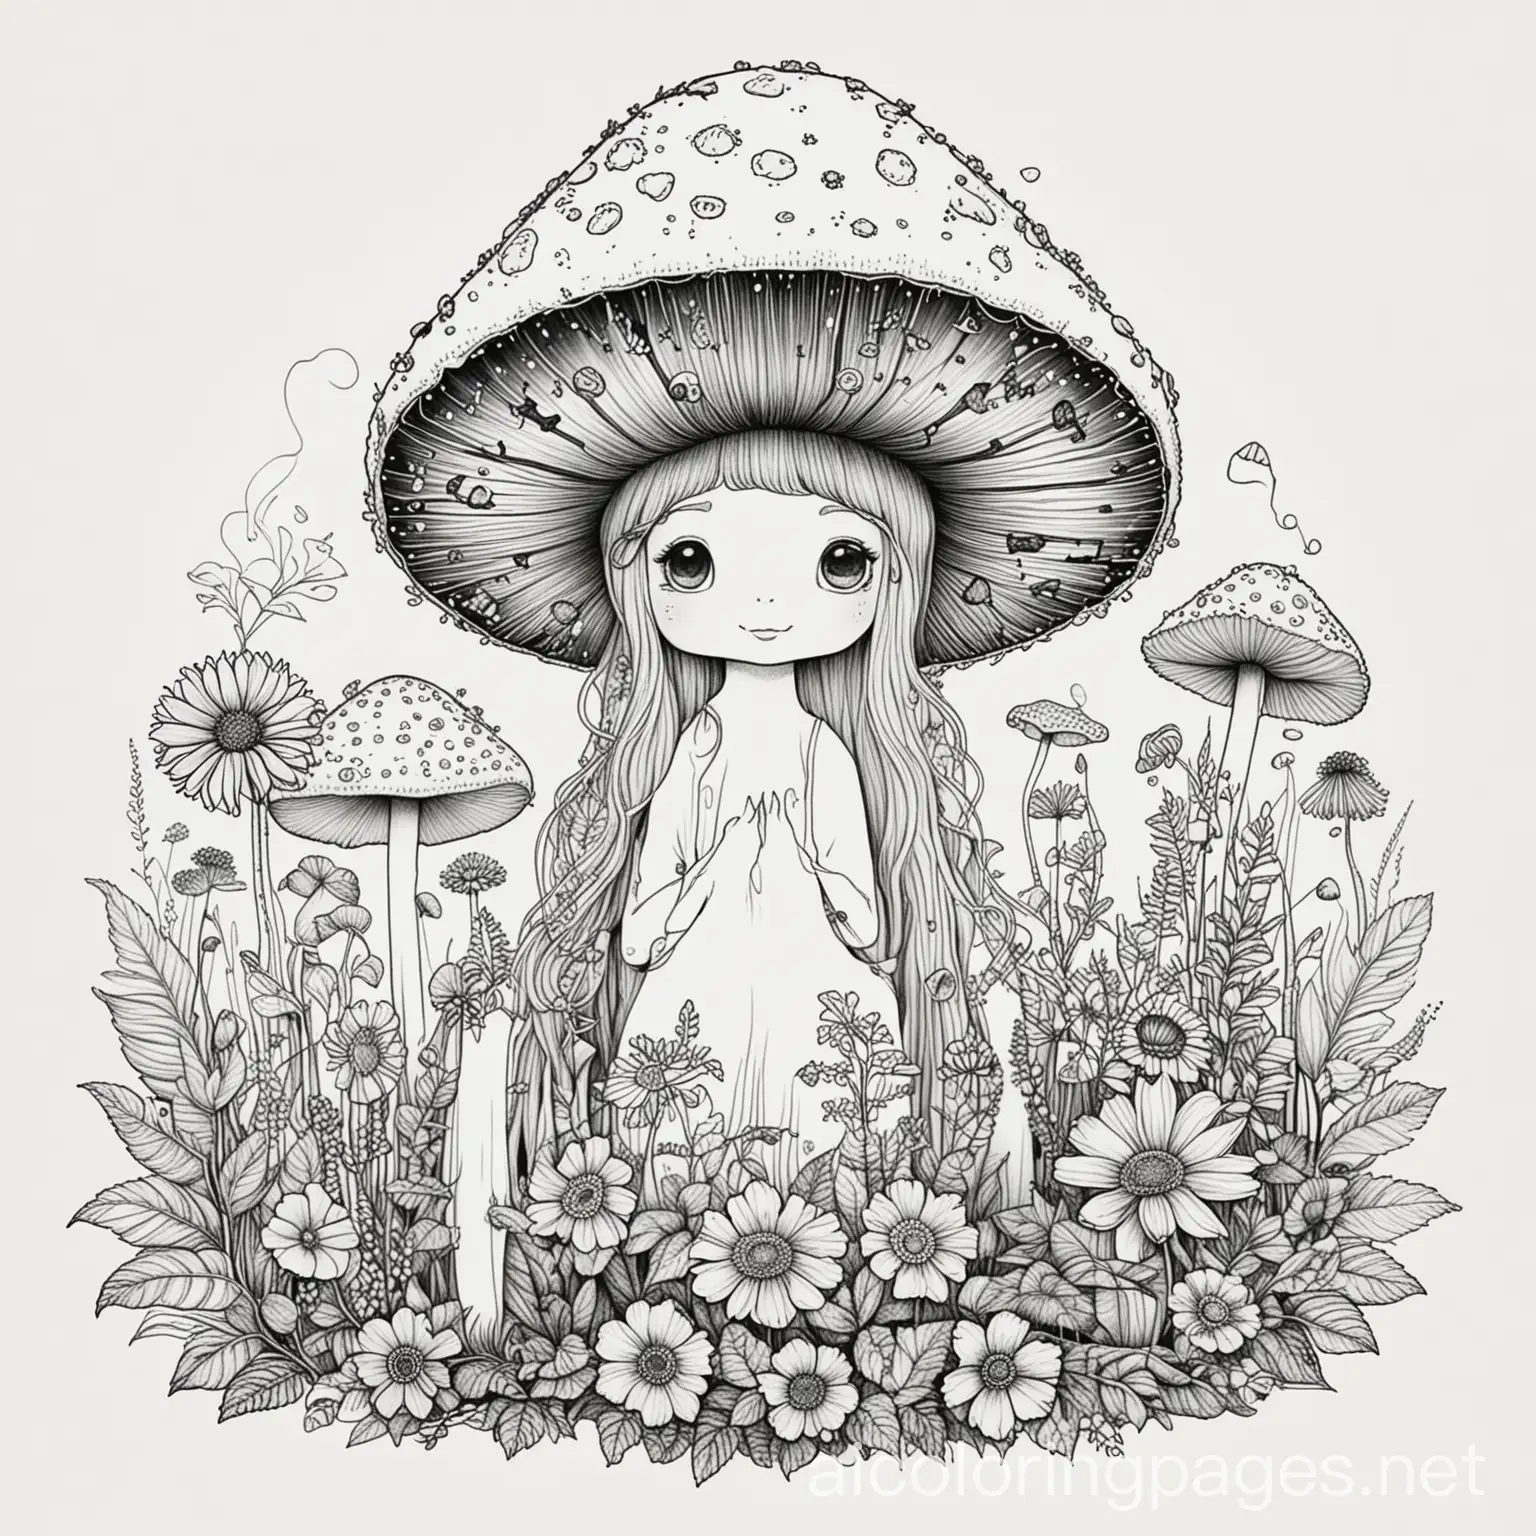 Hippie-Art-Coloring-Page-Mushrooms-and-Flowers-in-Line-Art-Style